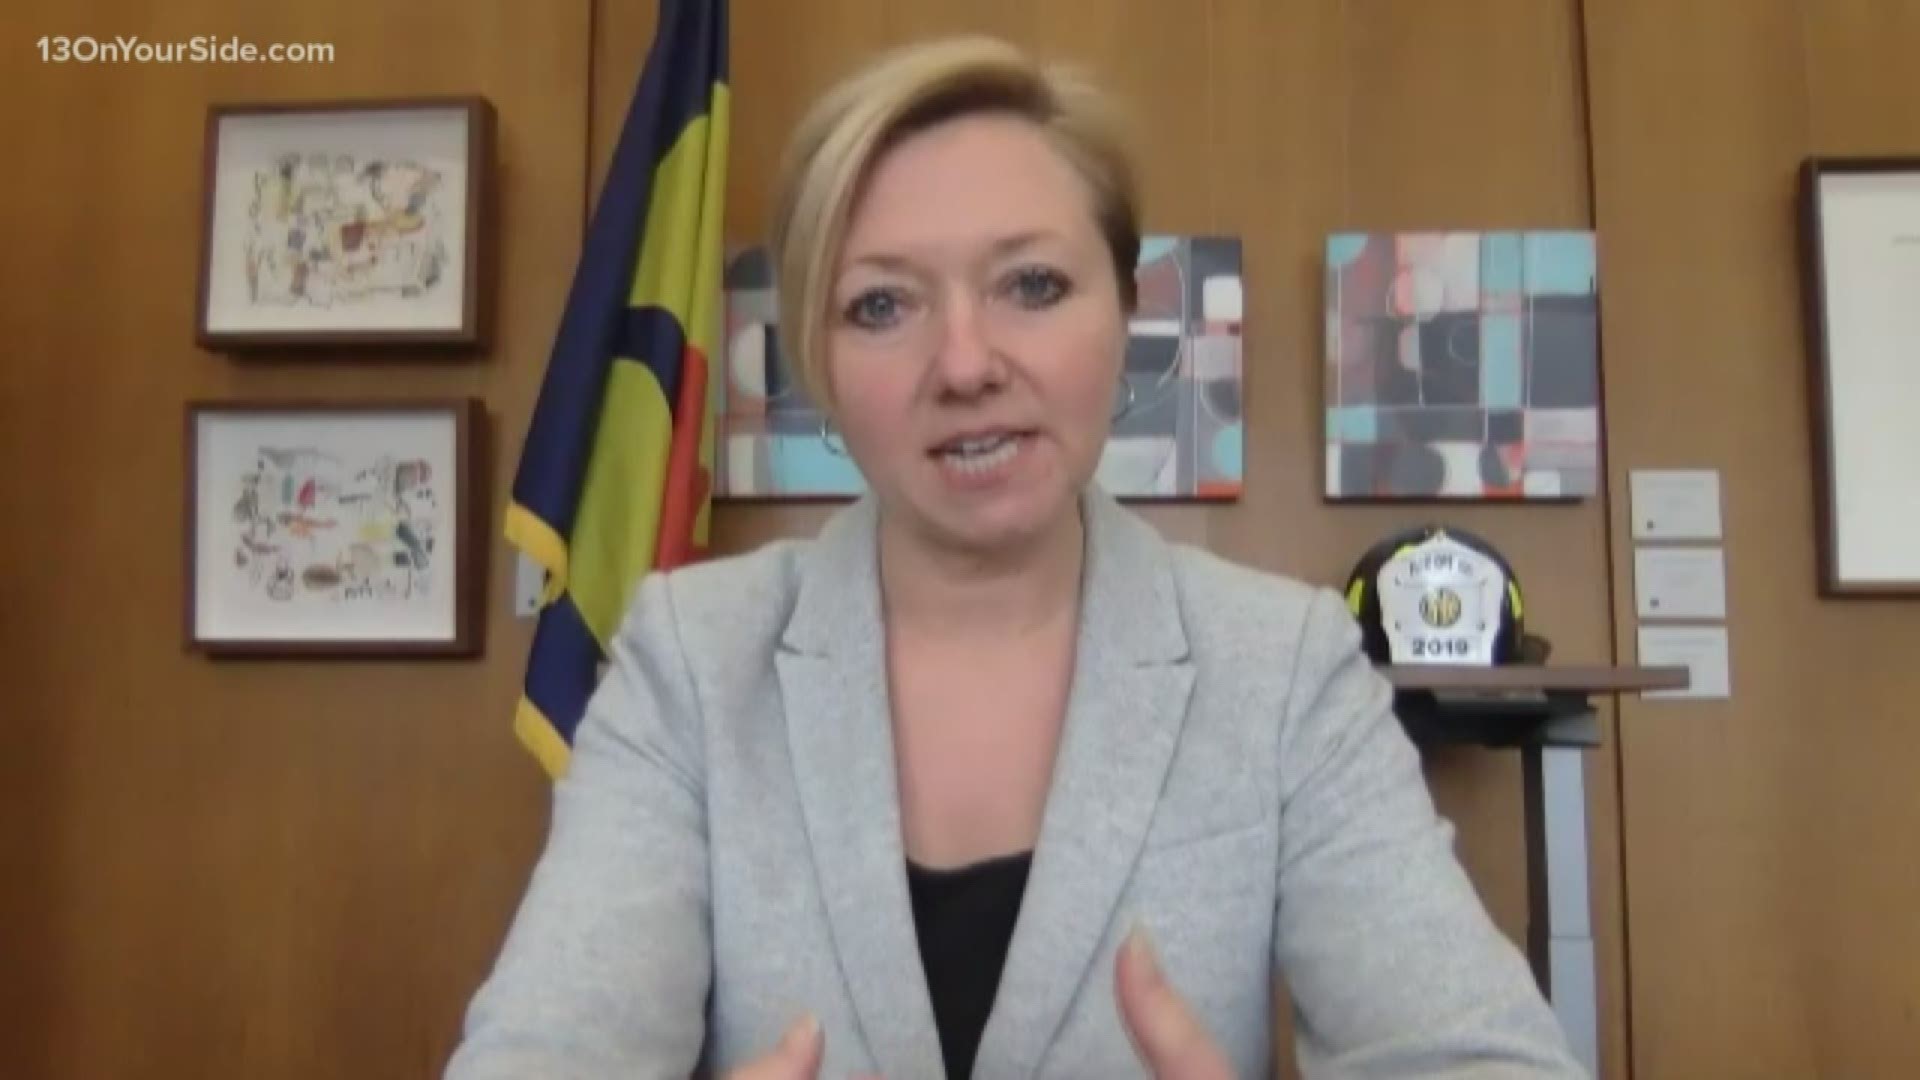 13 ON YOUR SIDE speaks with Grand Rapids Mayor Rosalynn Bliss about city's response.